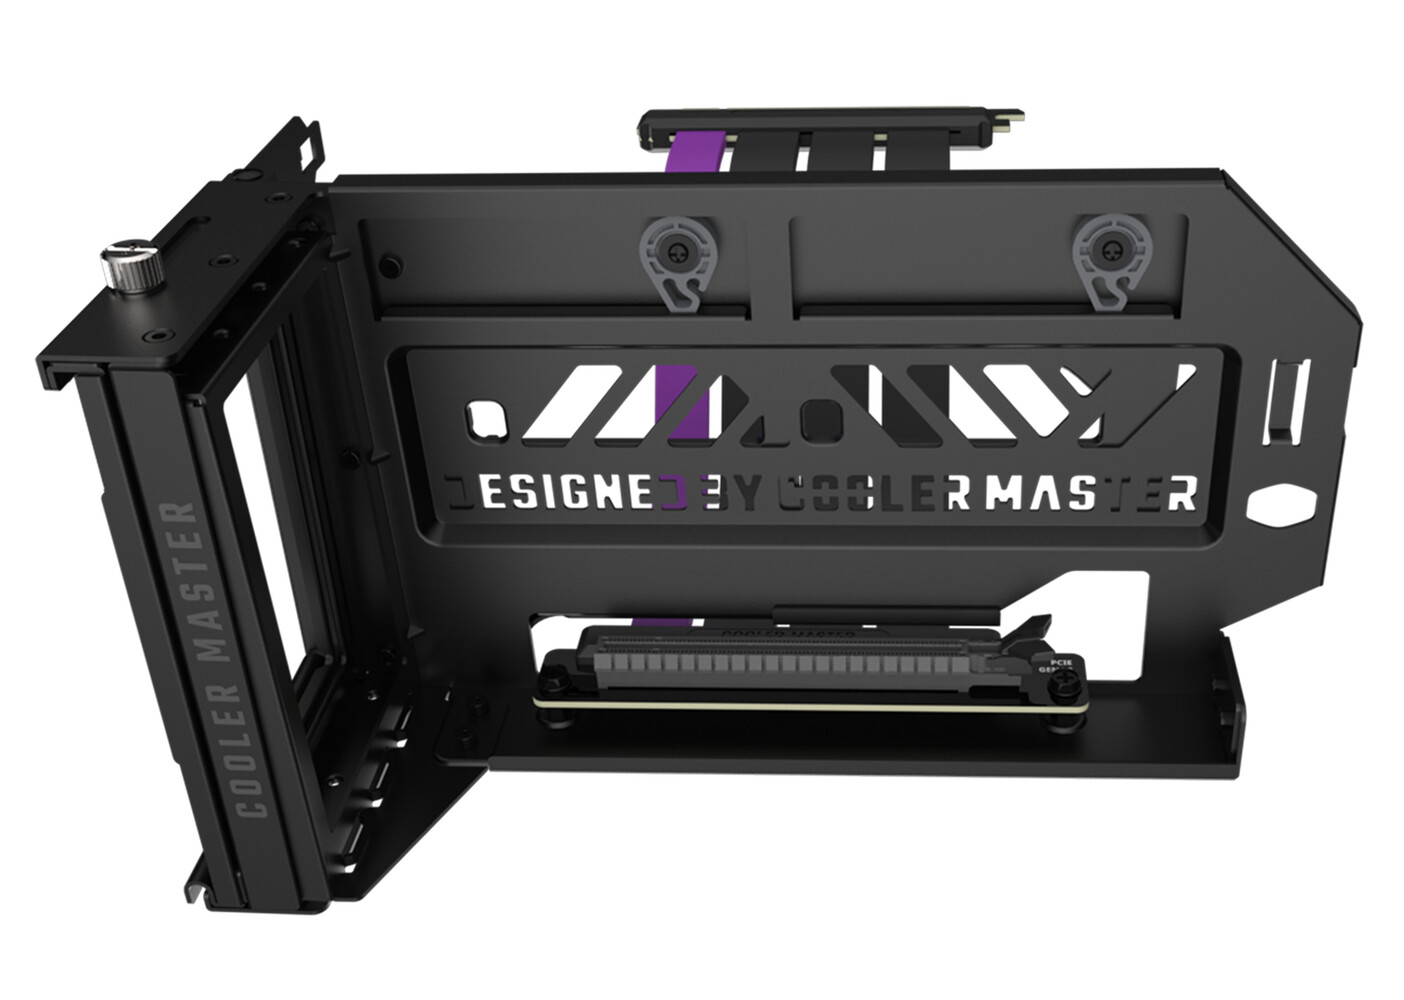 Cooler Master Also Out the Vertical Graphics Card Holder V3 | TechPowerUp